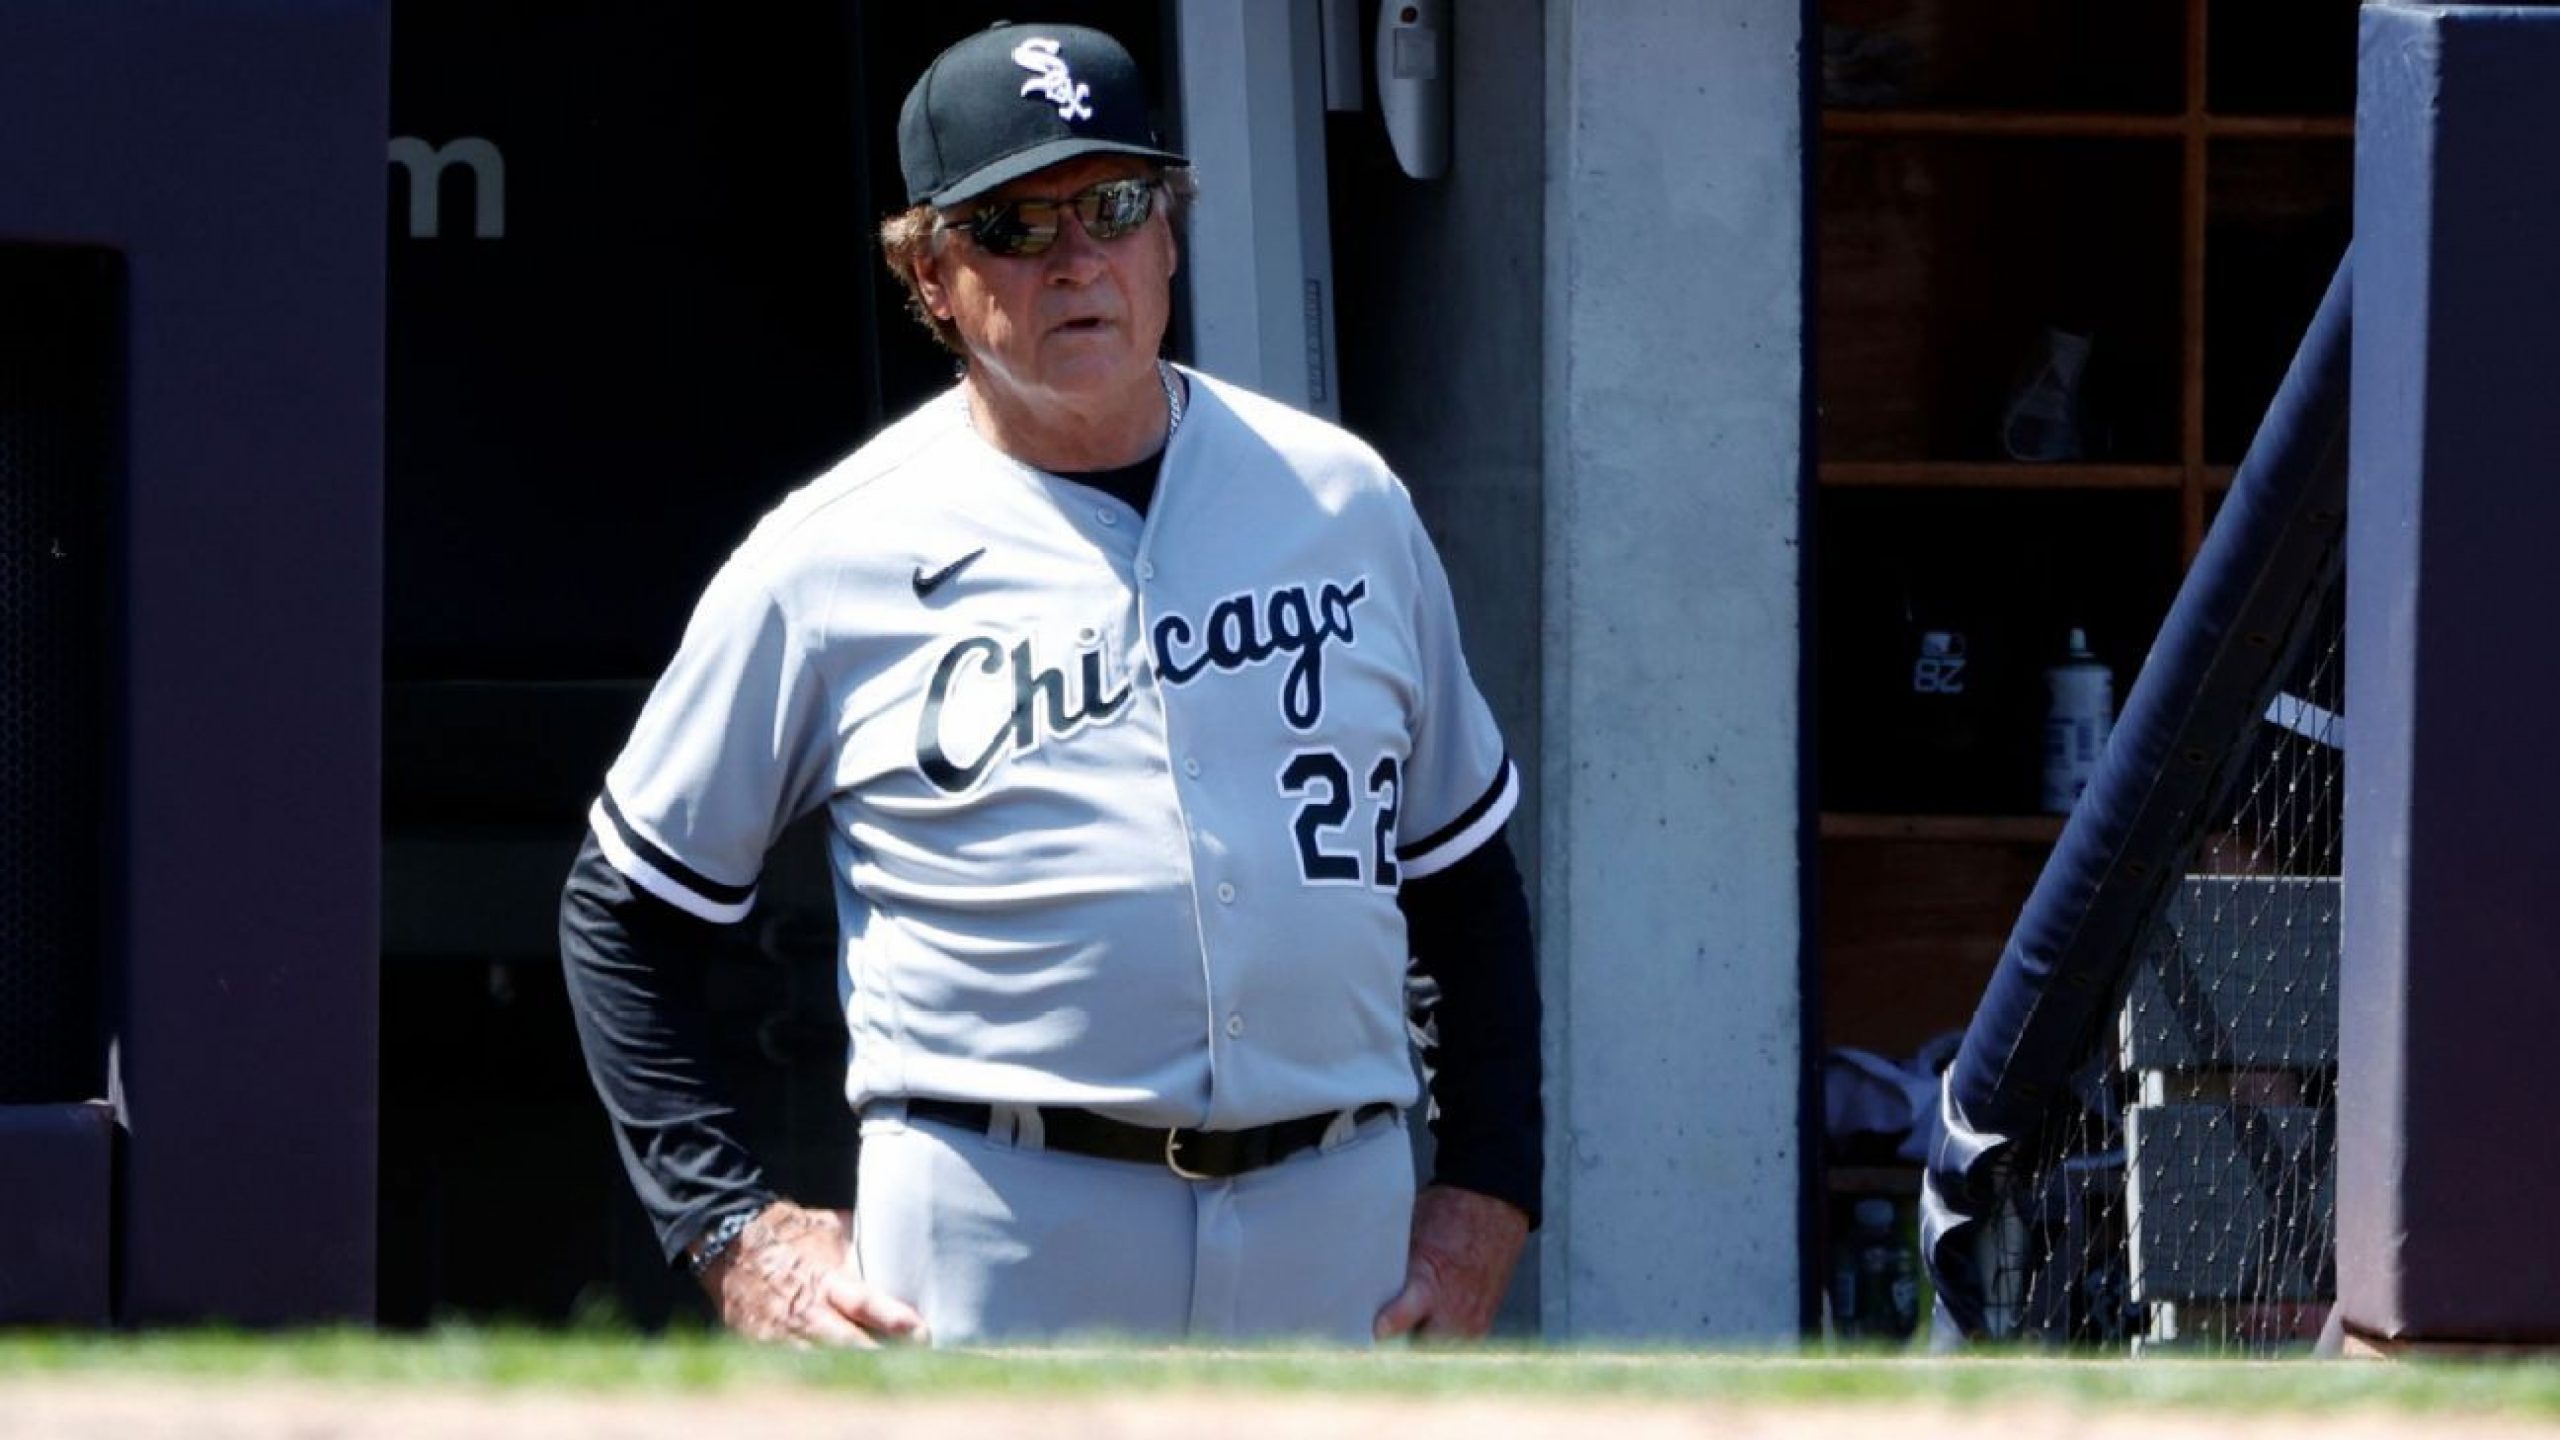 Family upset ChiSox named lounge for La Russa